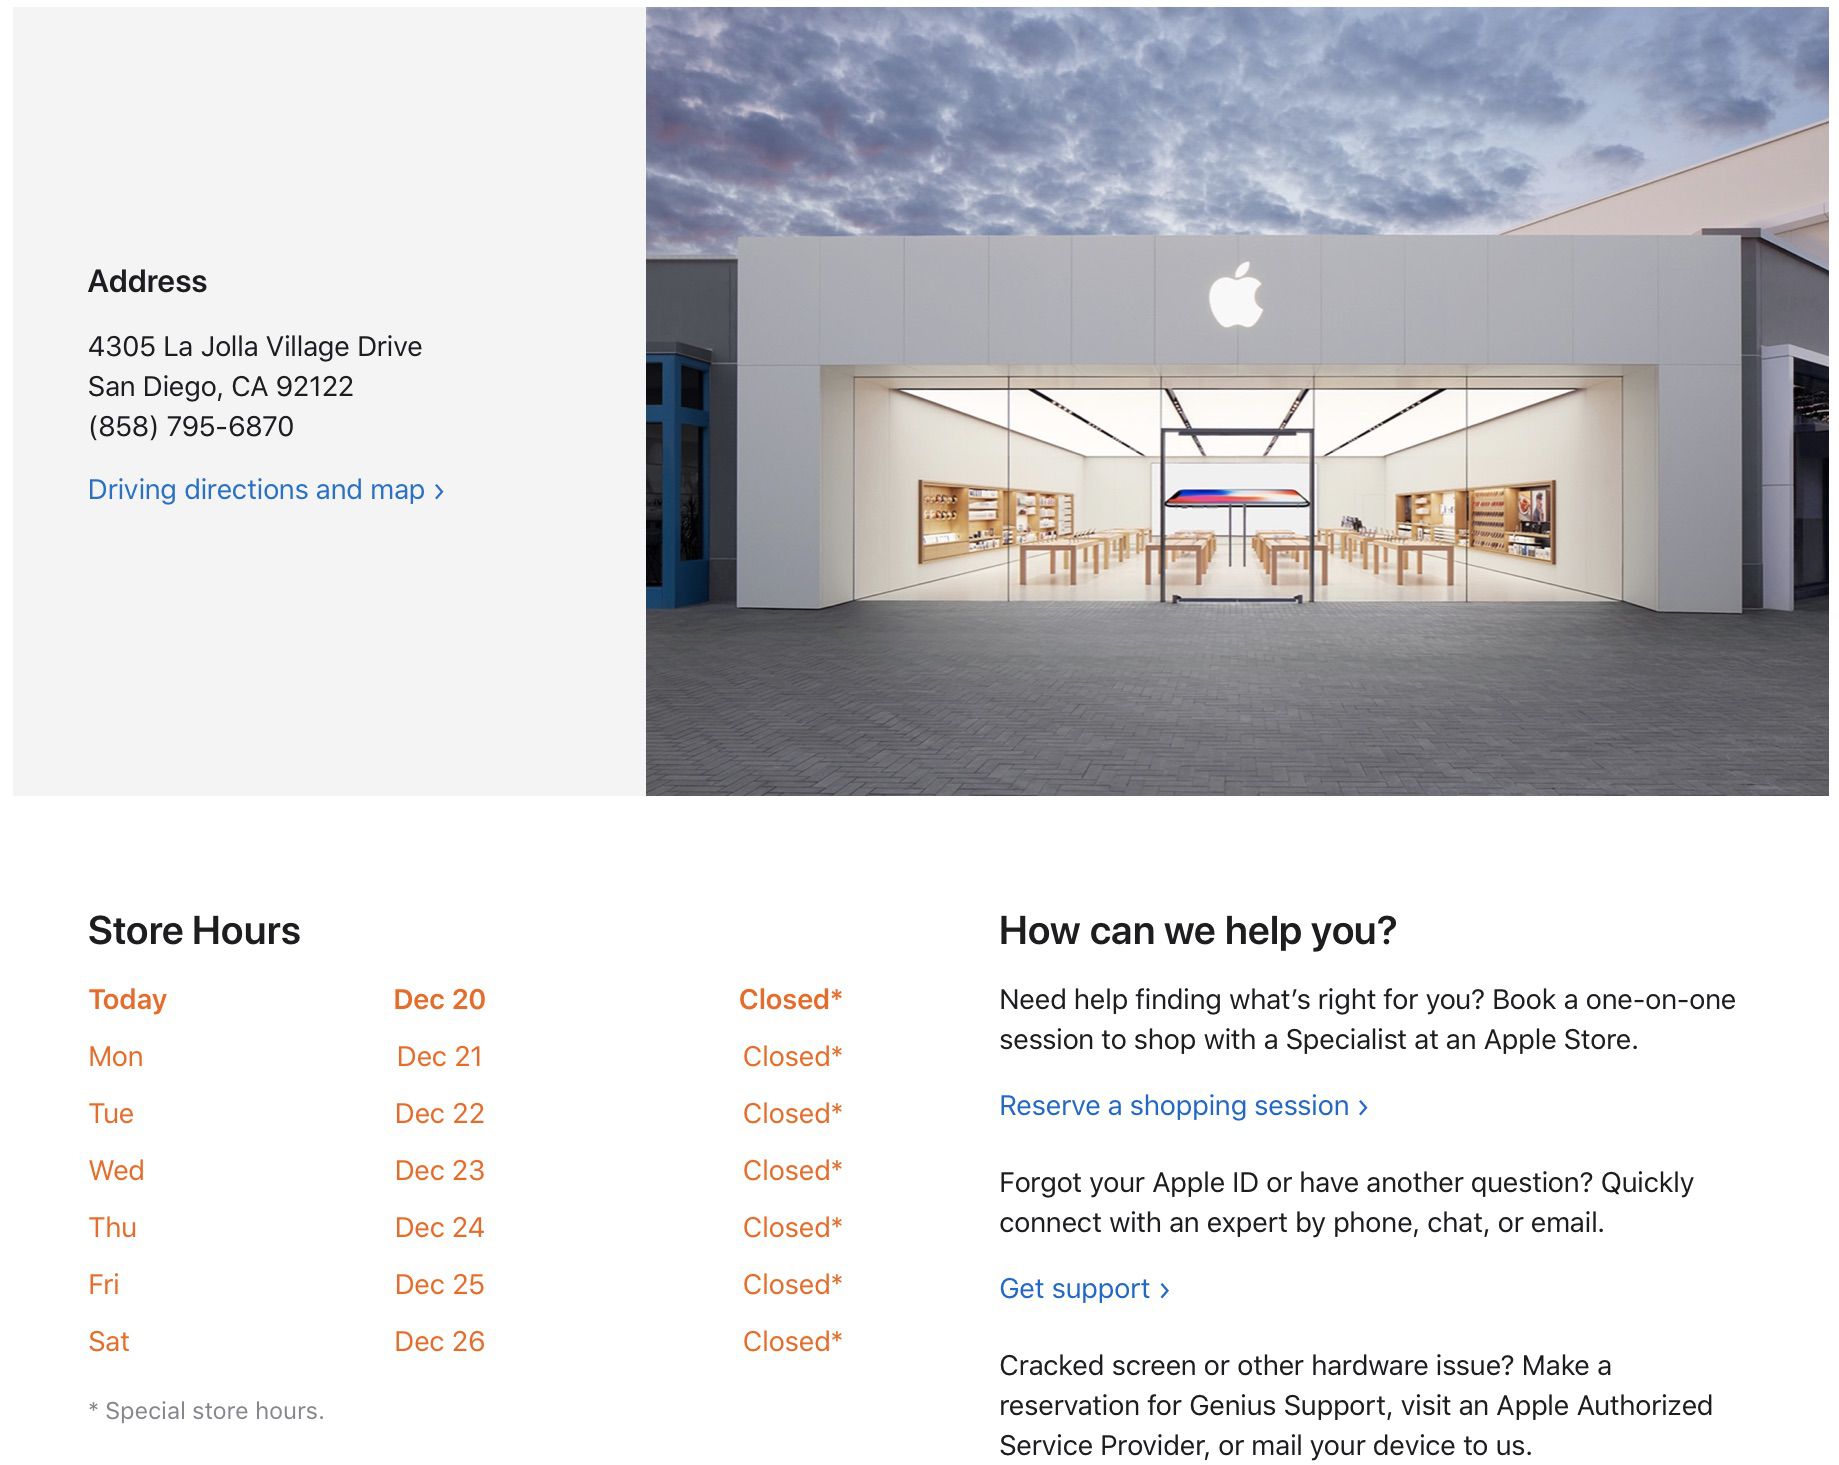 Apple Store Hours of Operation Today